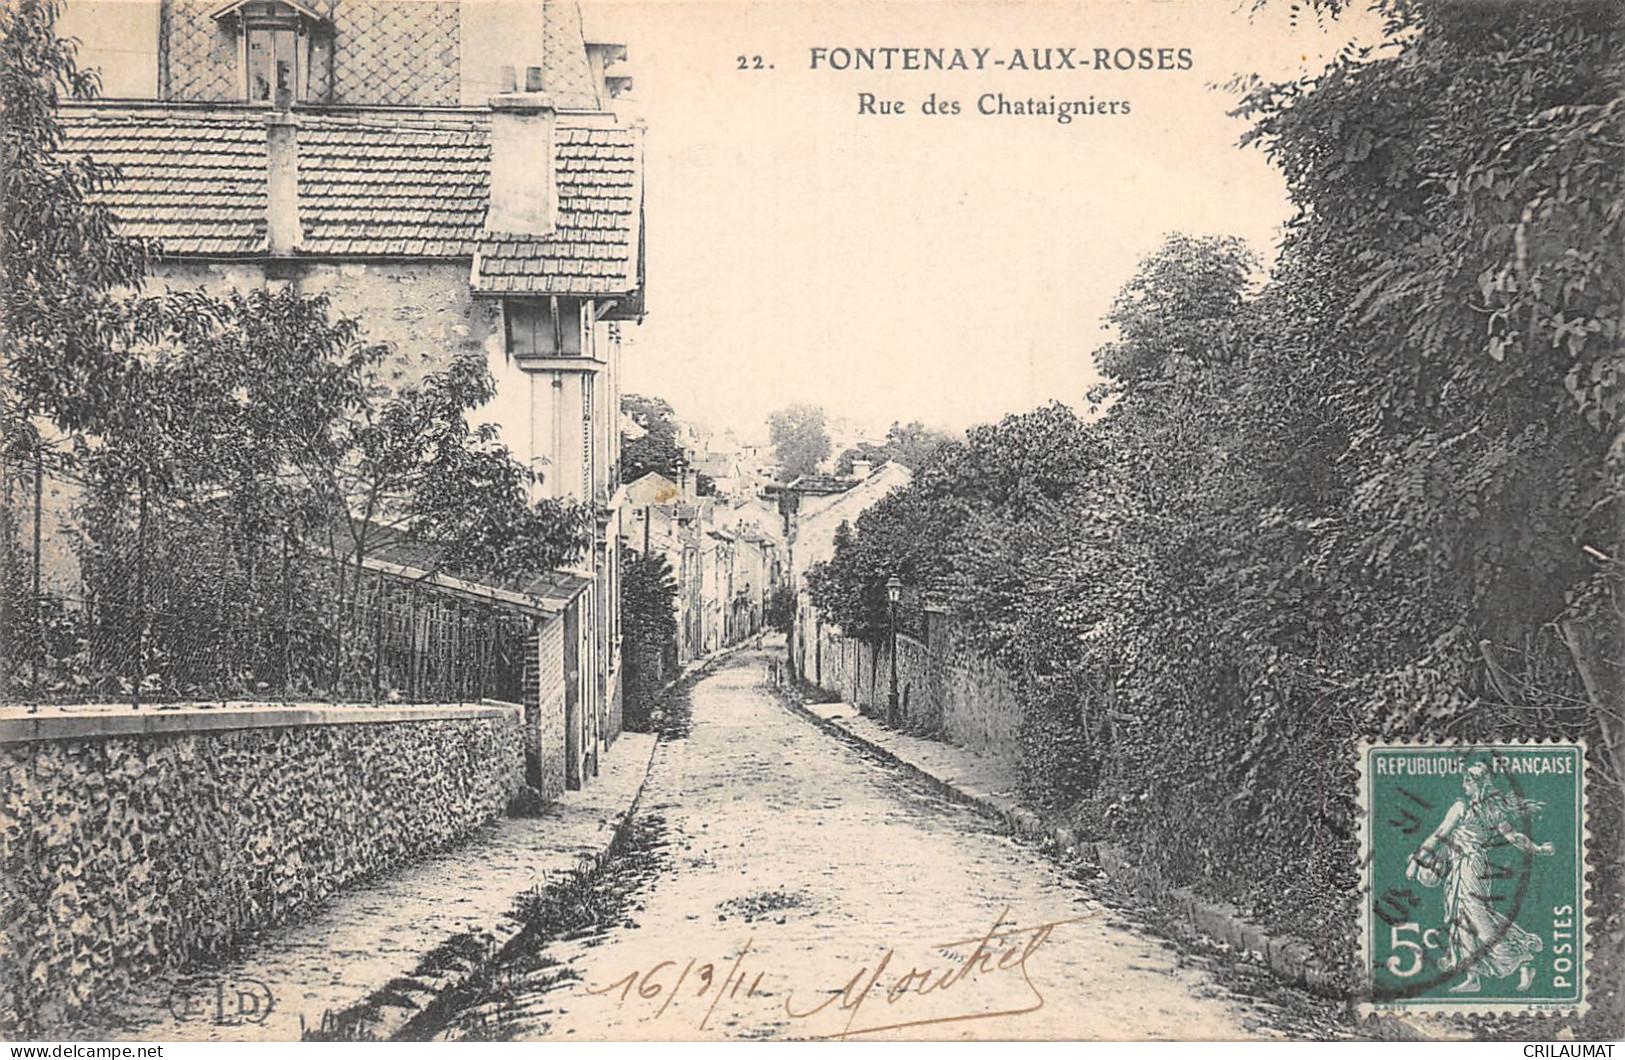 92-FONTENAY AUX ROSES-RUE DES CHATAIGNIERS-N°6031-G/0051 - Fontenay Aux Roses